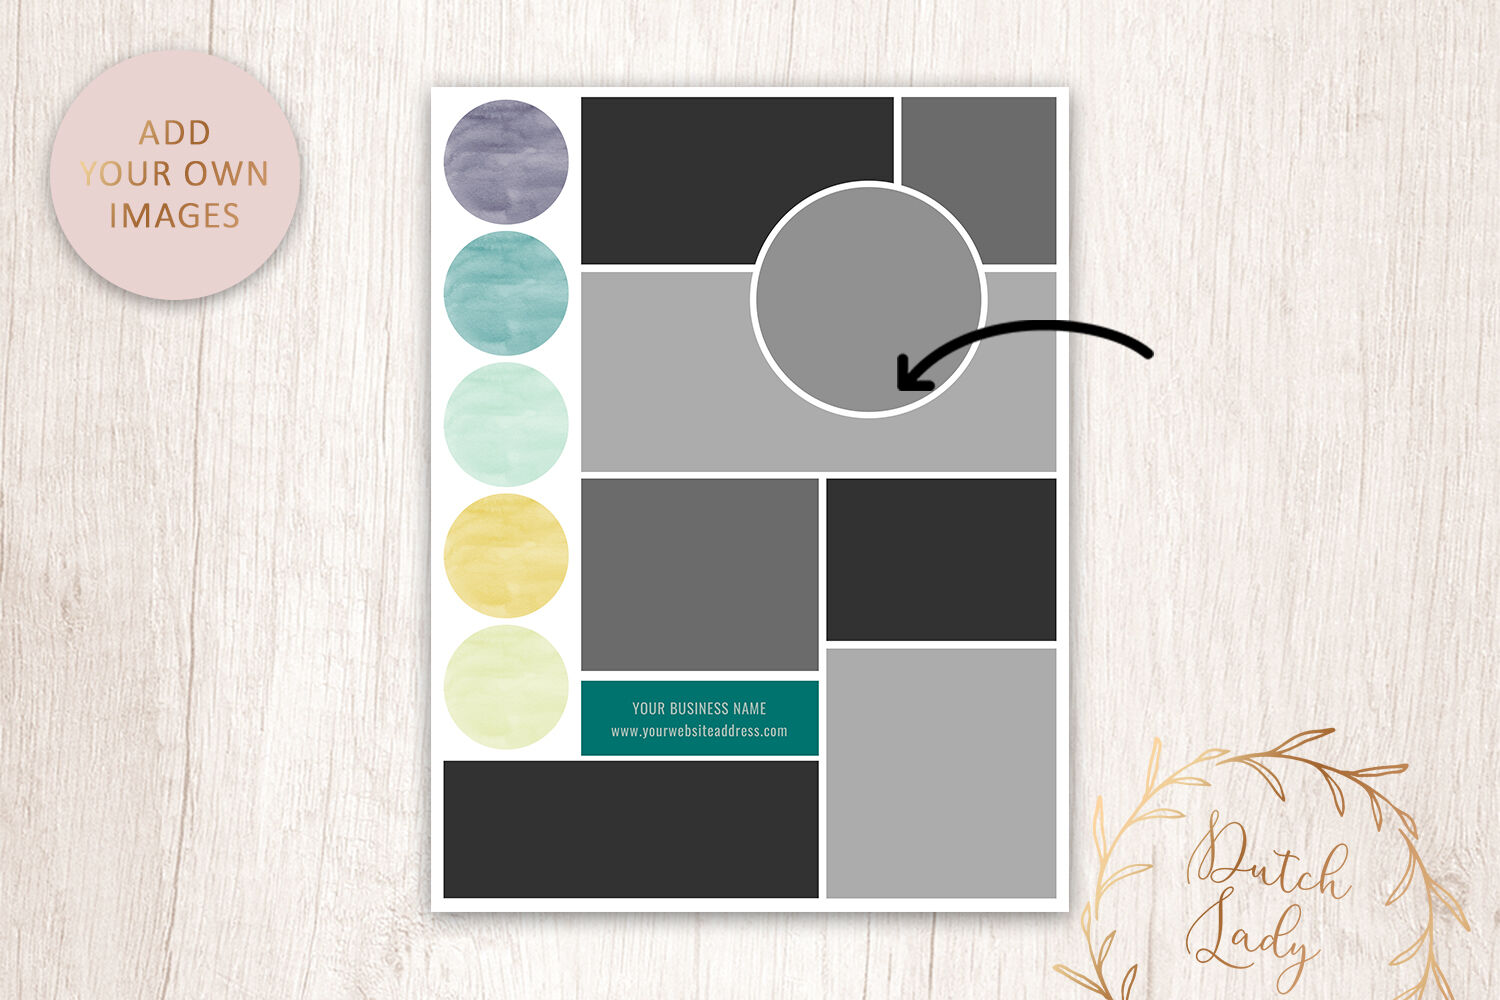 PSD Mood & Vision Board Template #2 By The Dutch Lady Designs ...